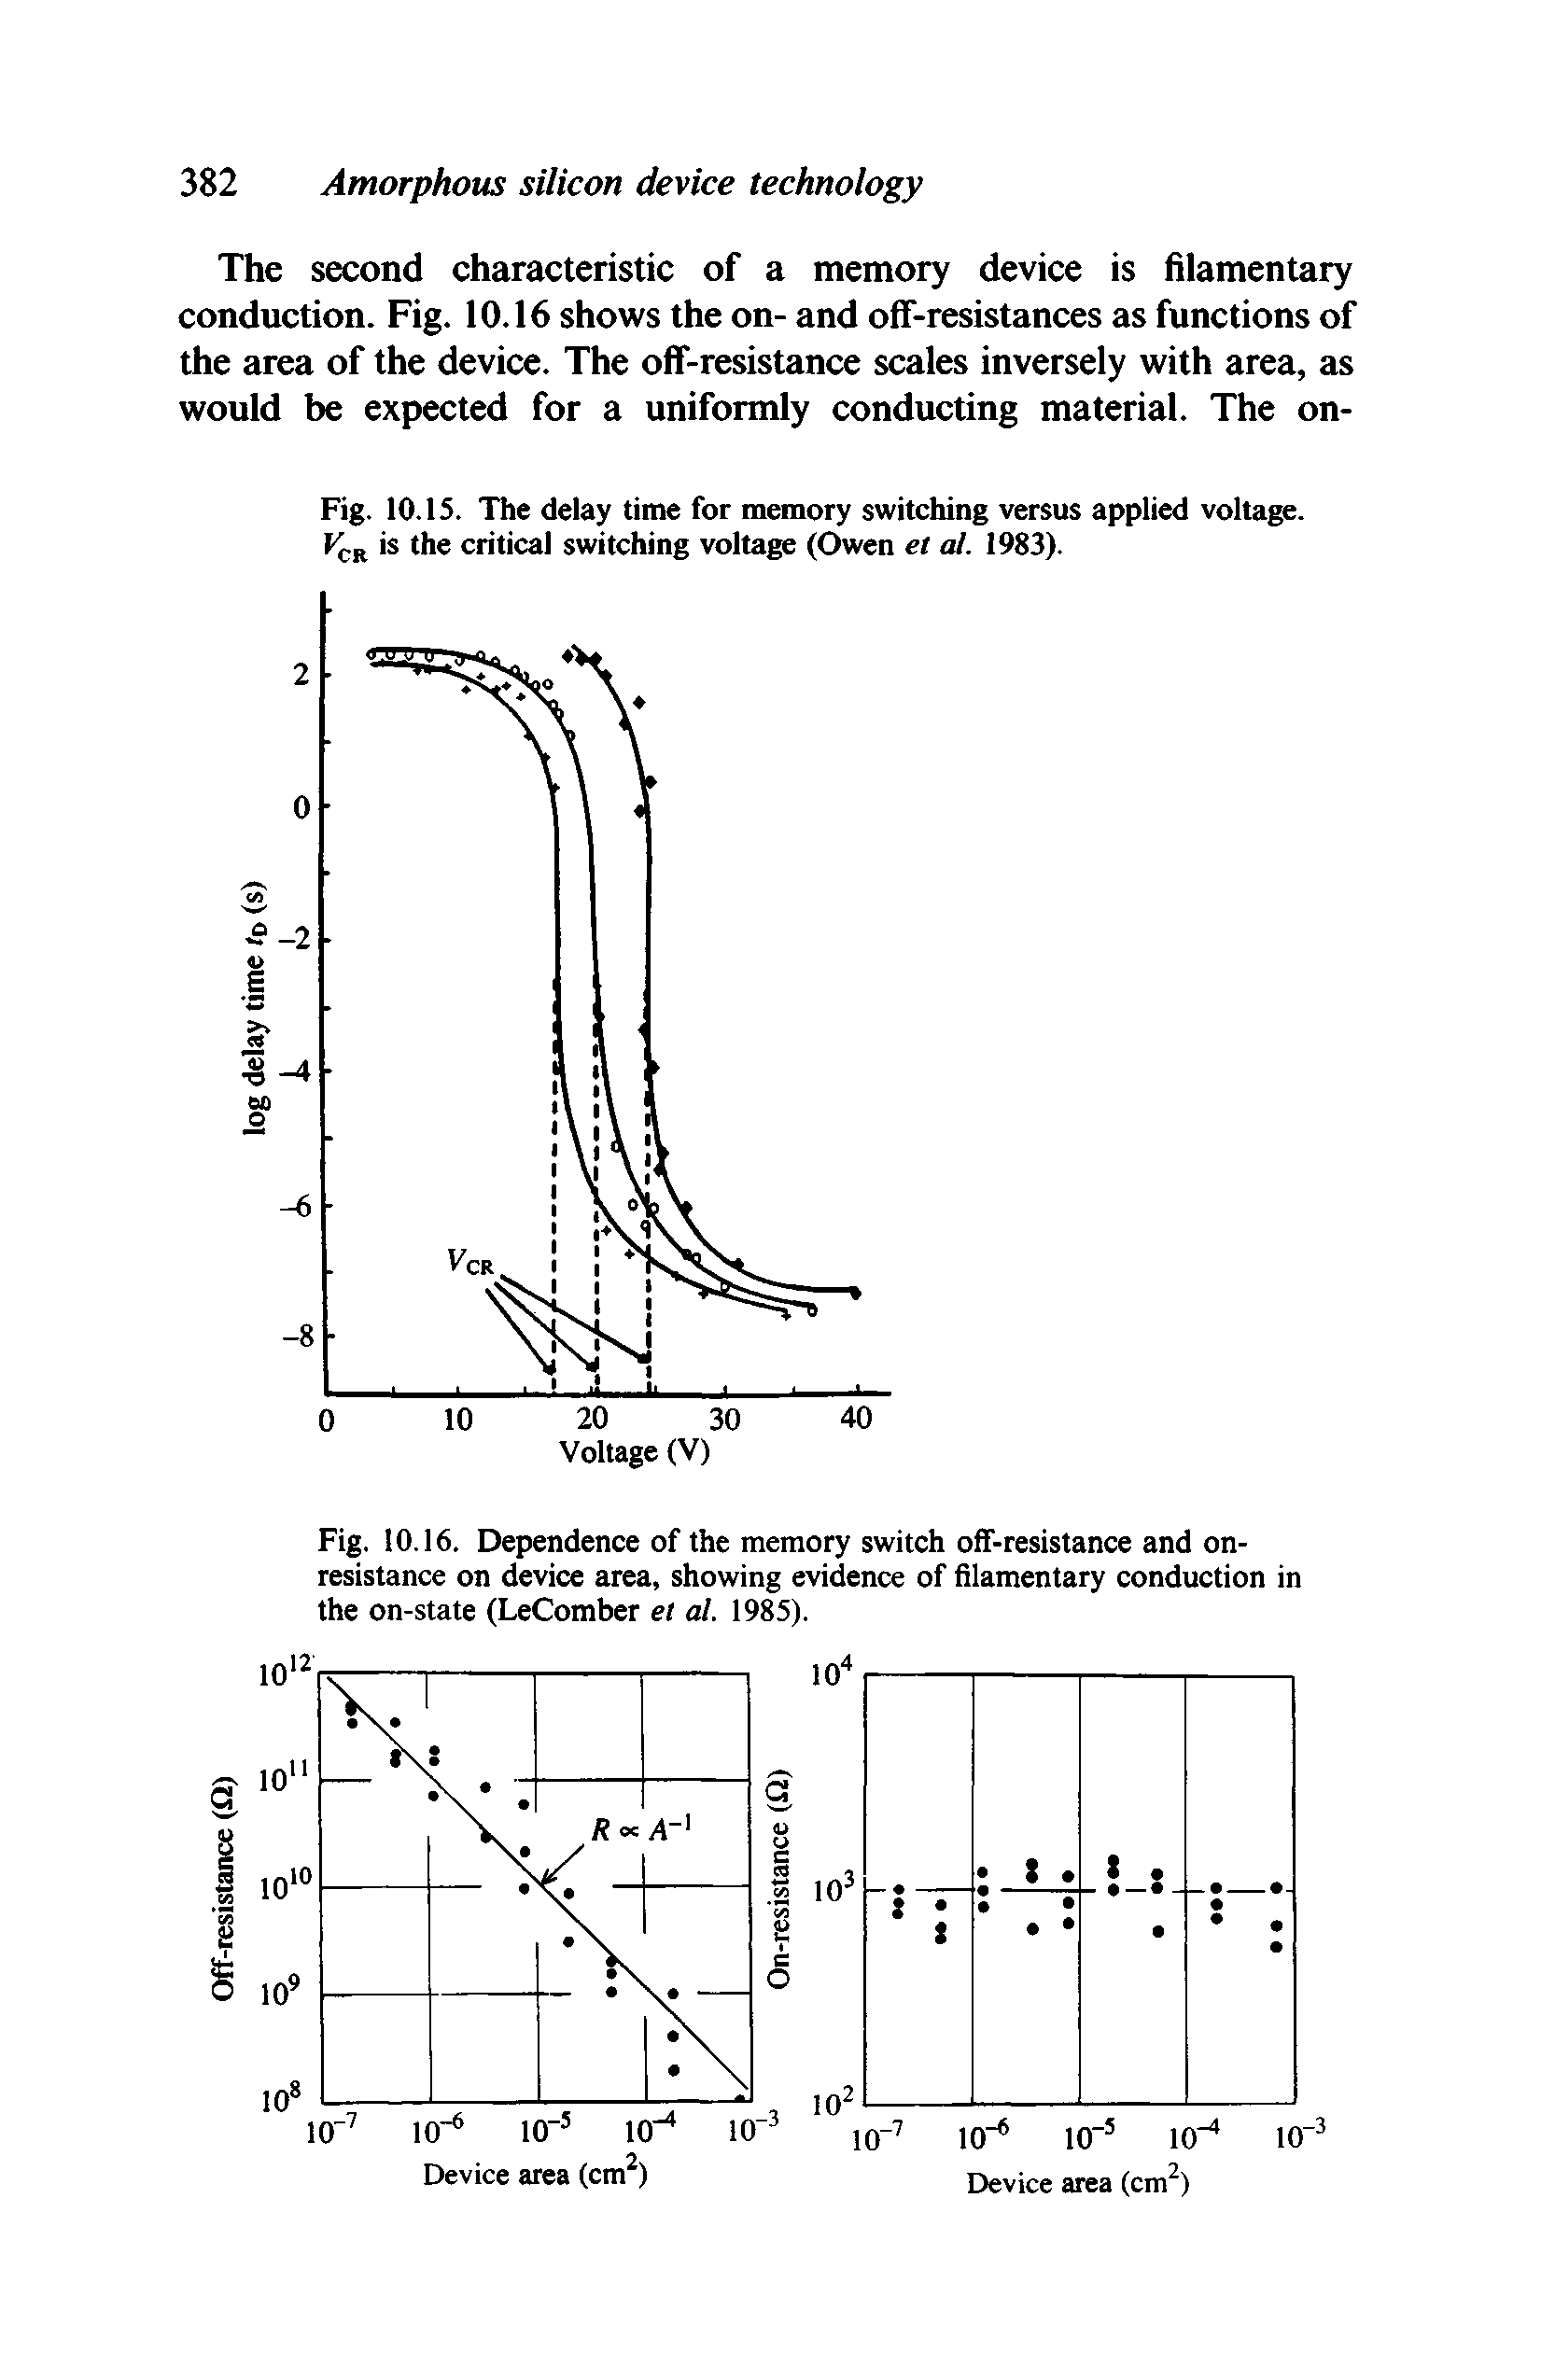 Fig. 10.16. Dependence of the memory switch oif-resistance and on-resistance on device area, showing evidence of filamentary conduction in the on-state (LeComber et al. 1985).